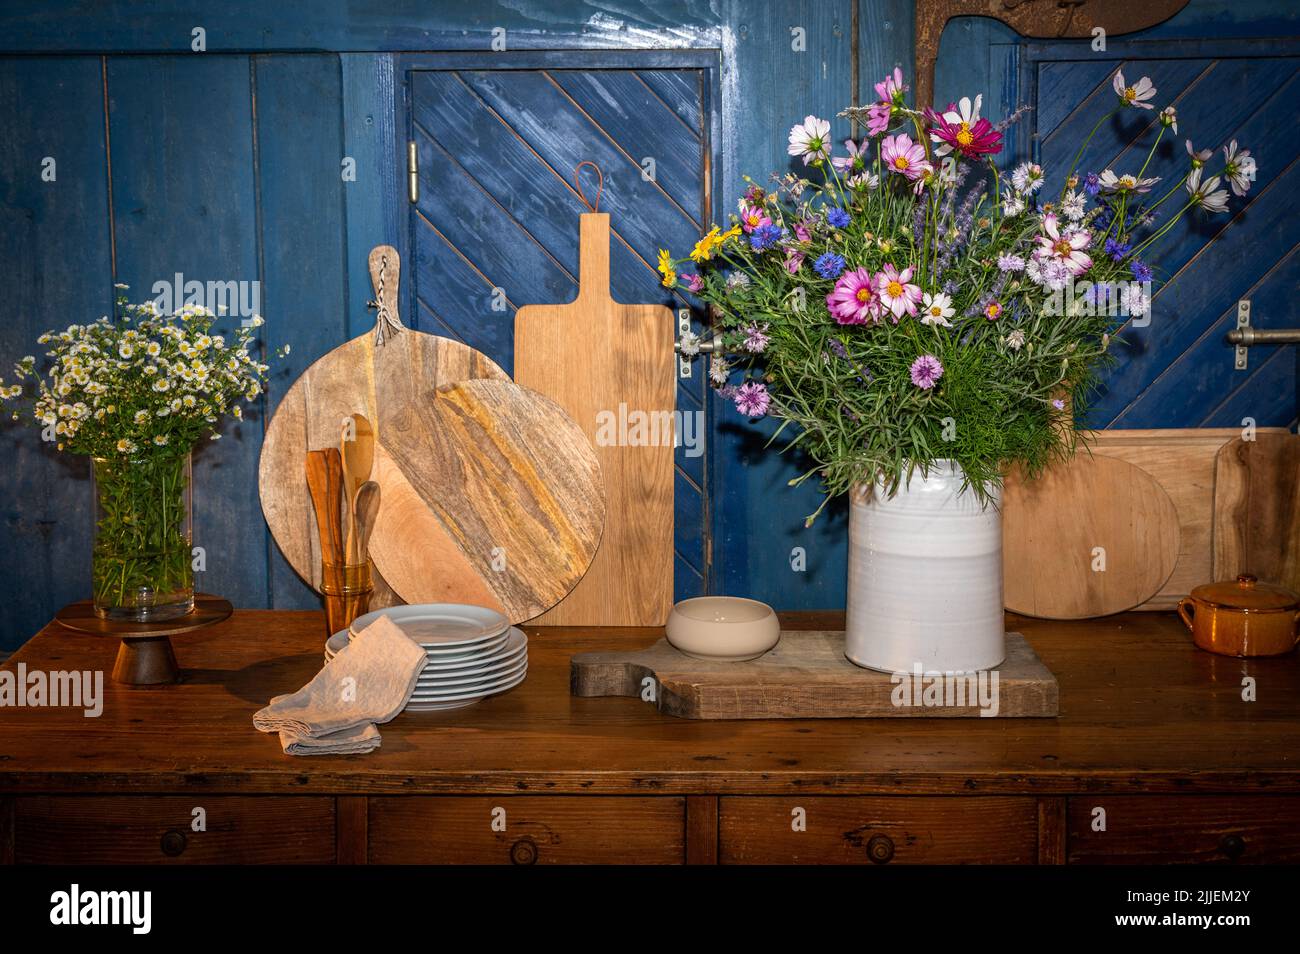 country decor vases, pots, boards and field flowers Stock Photo